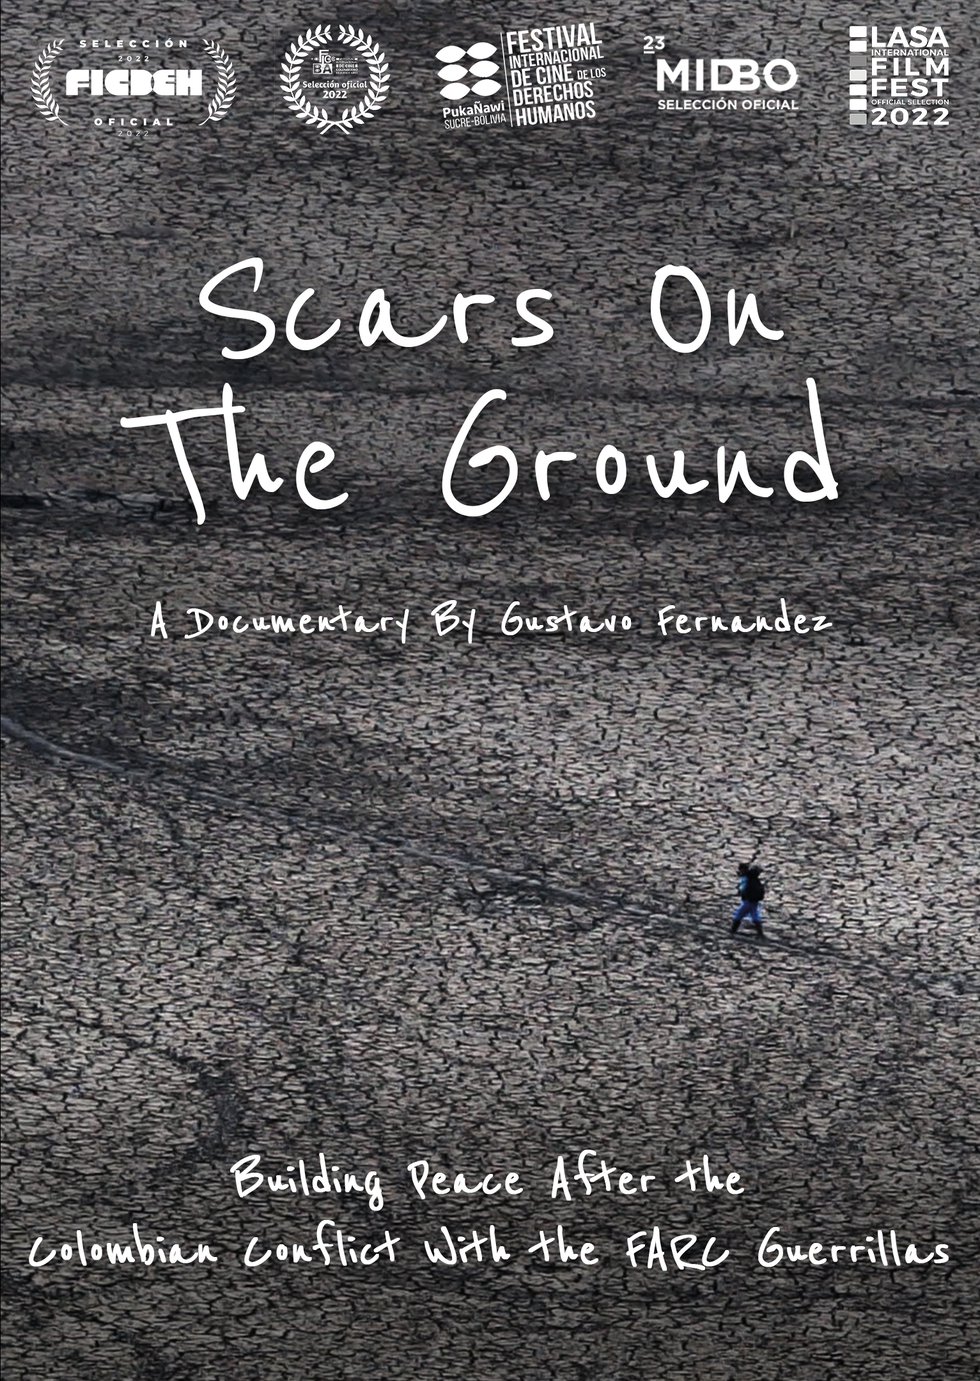 Scars on the Ground poster.jpeg